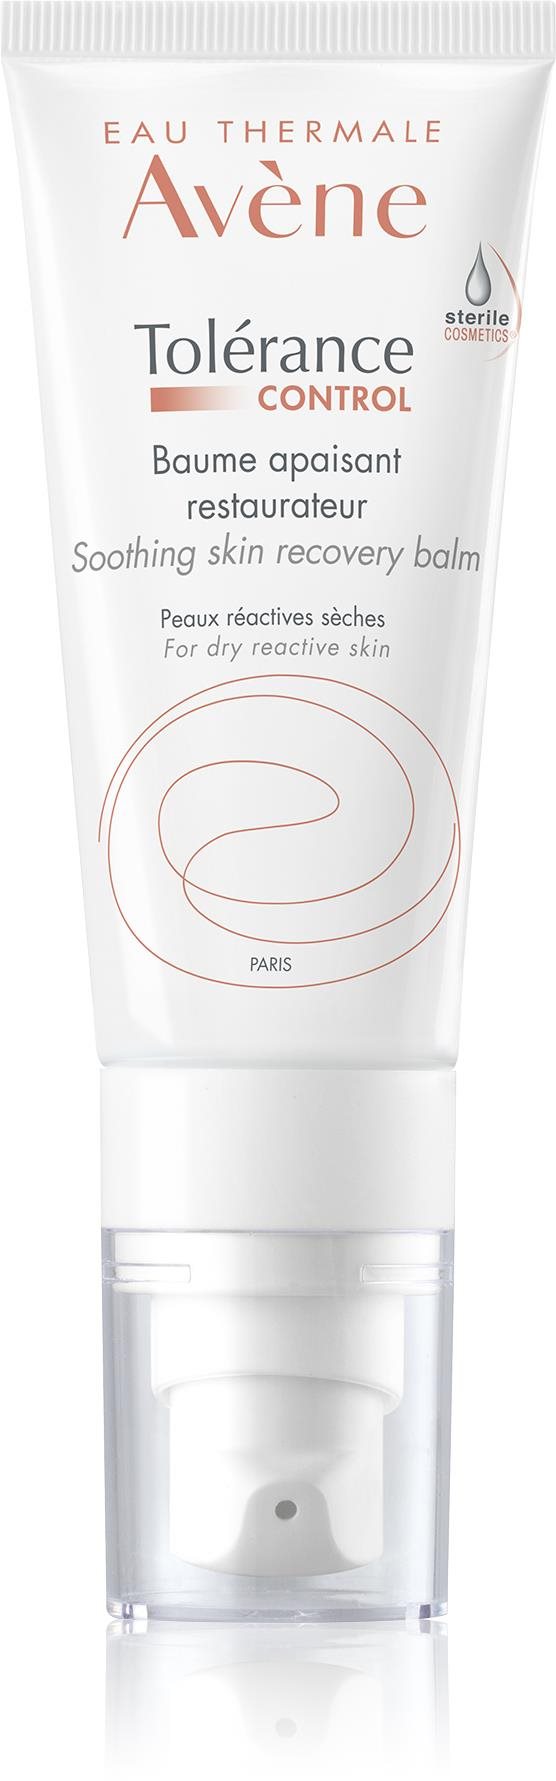 AVENE Tolérance Control Soothing Skin Recovery Balm 40 ml